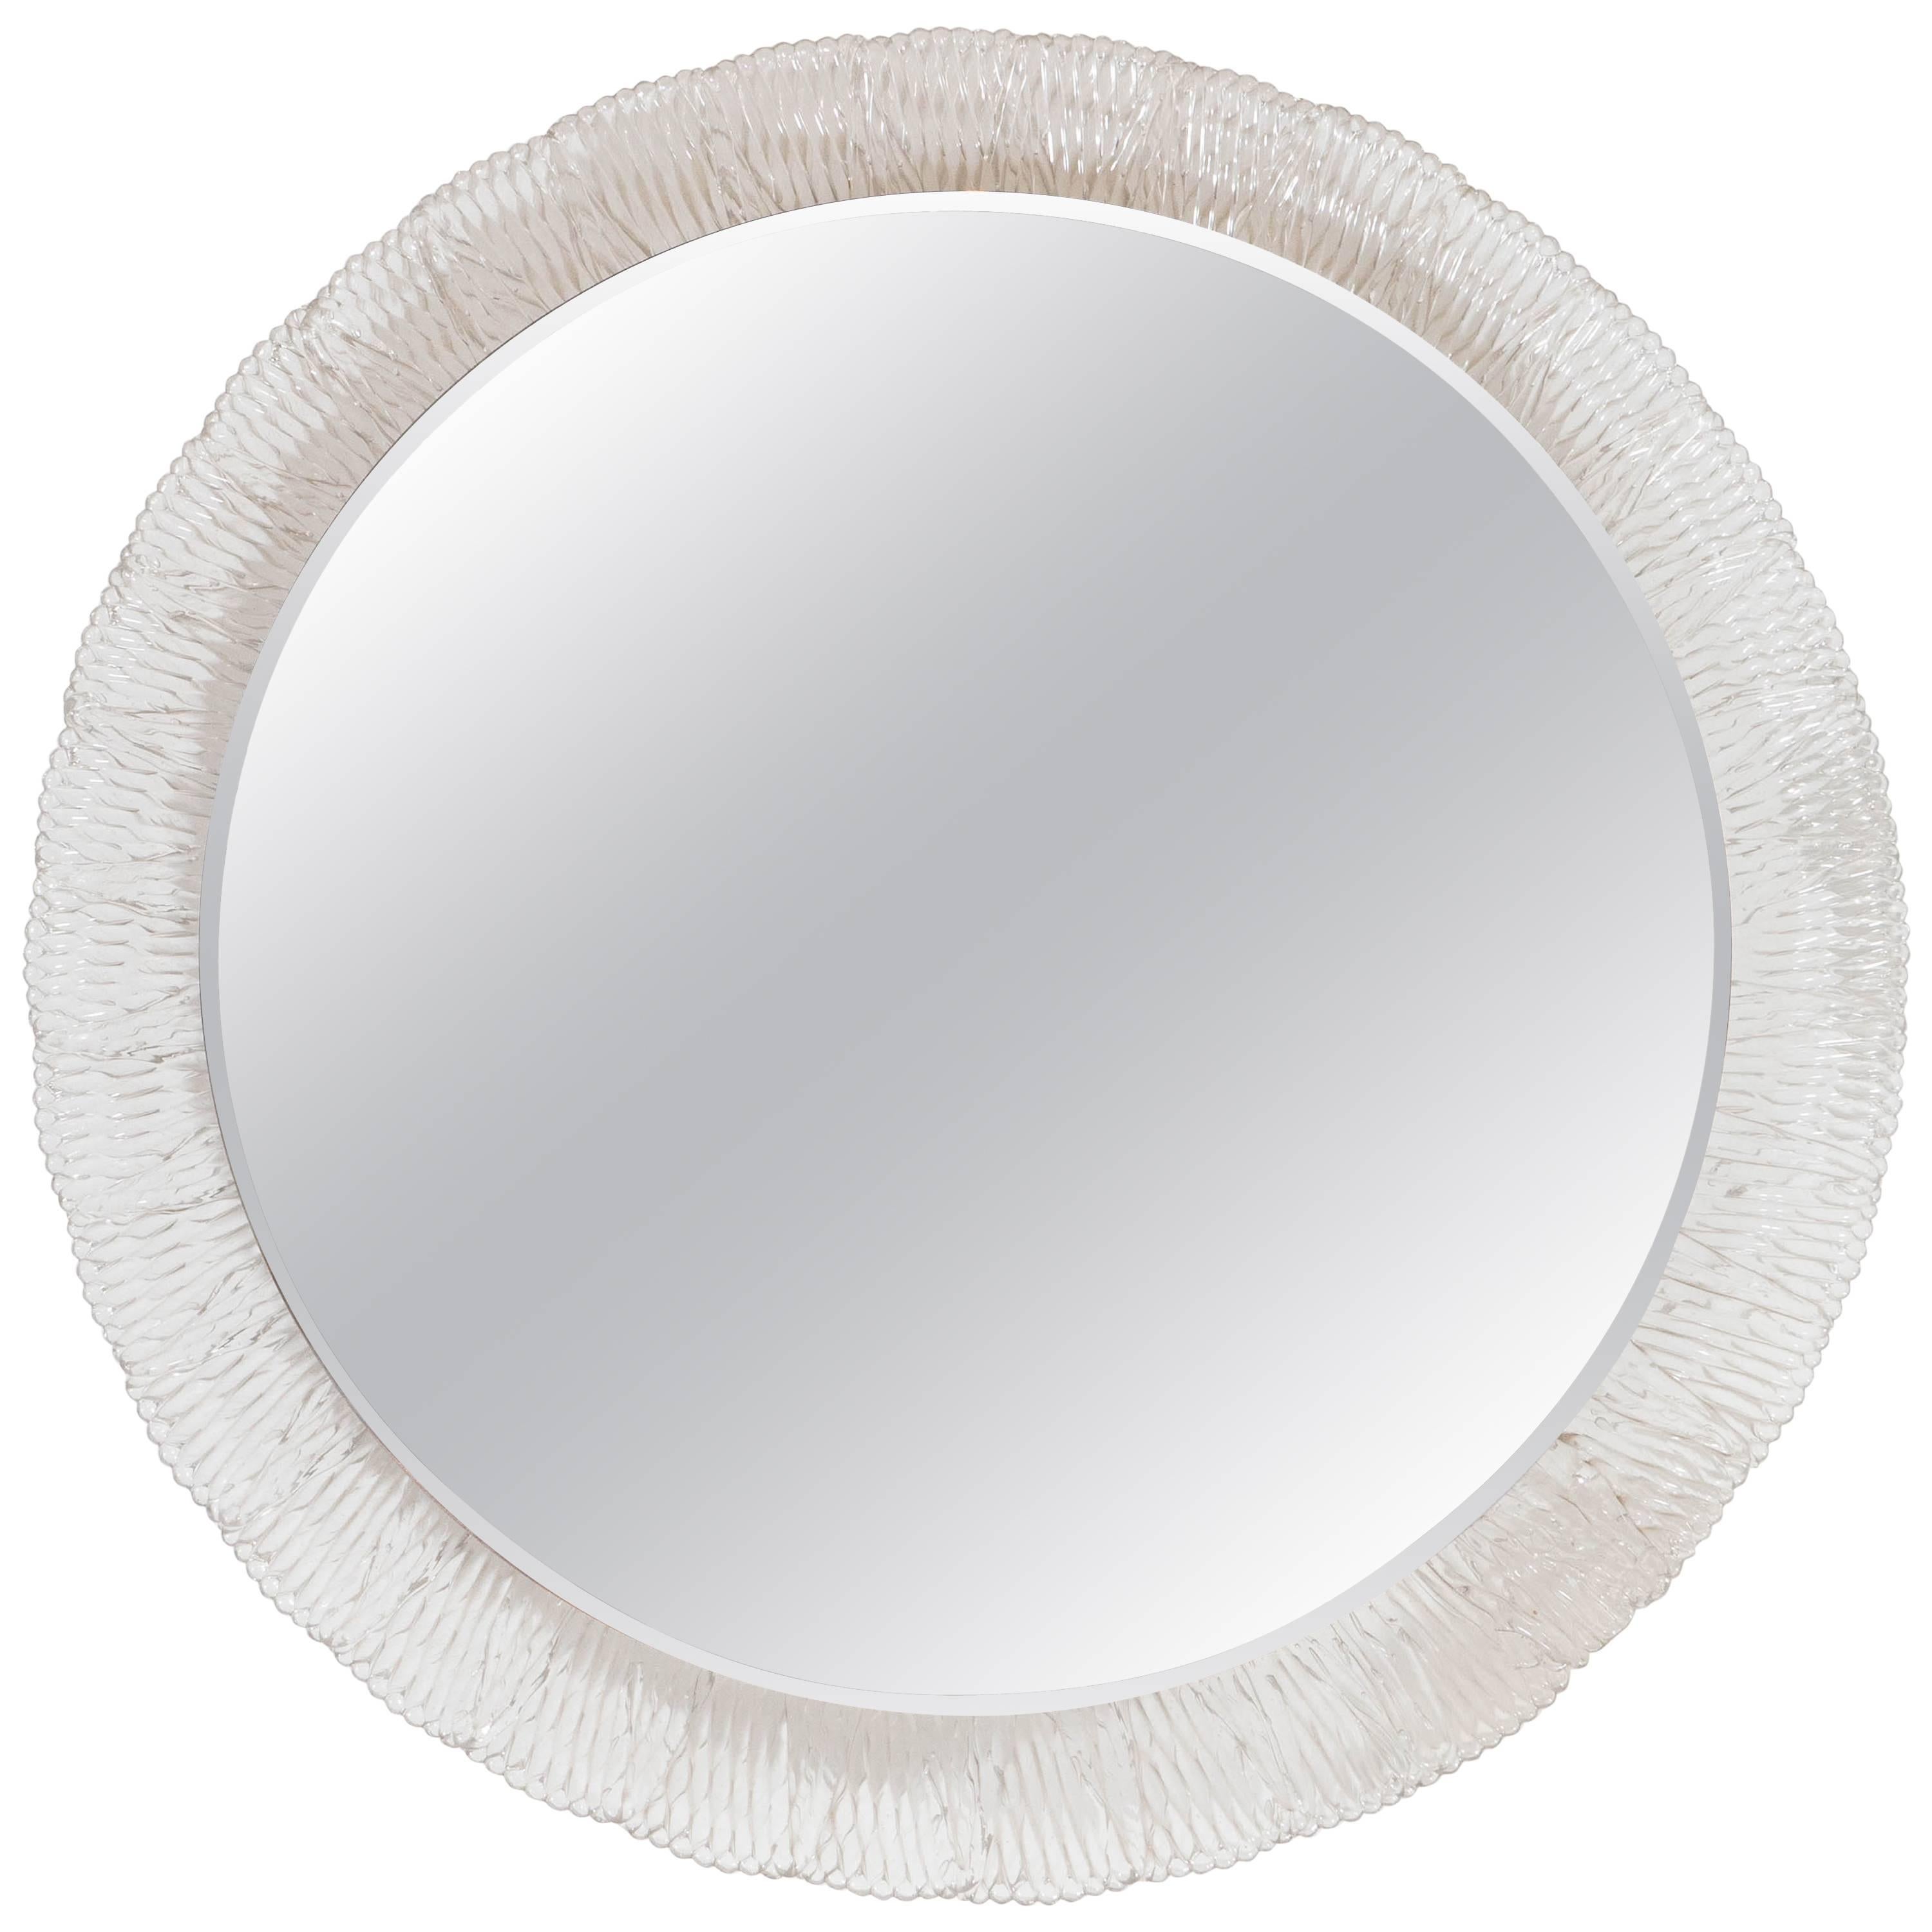 Round Illuminated Wall Mirror with Lucite Frame Attributed to Hillebrand